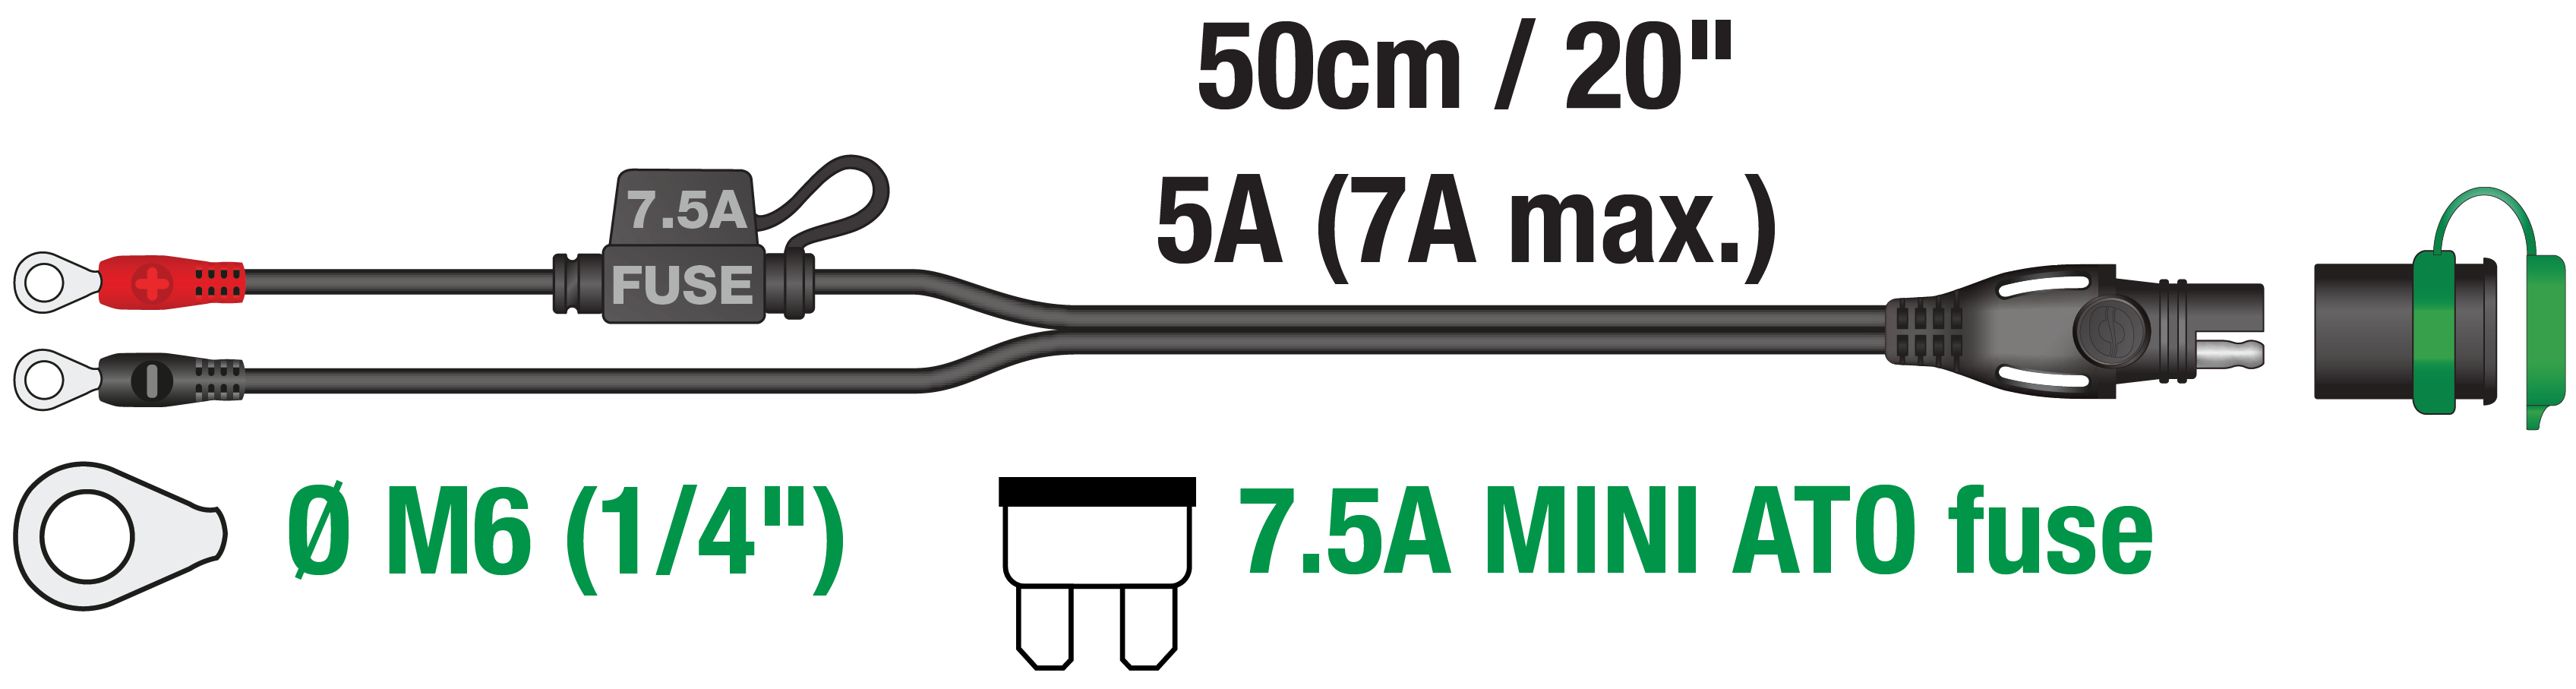 ringlets that perfectly fit to lithium power sport battery terminals with 7.5A fuse that protects the -40° rated cable and electronics